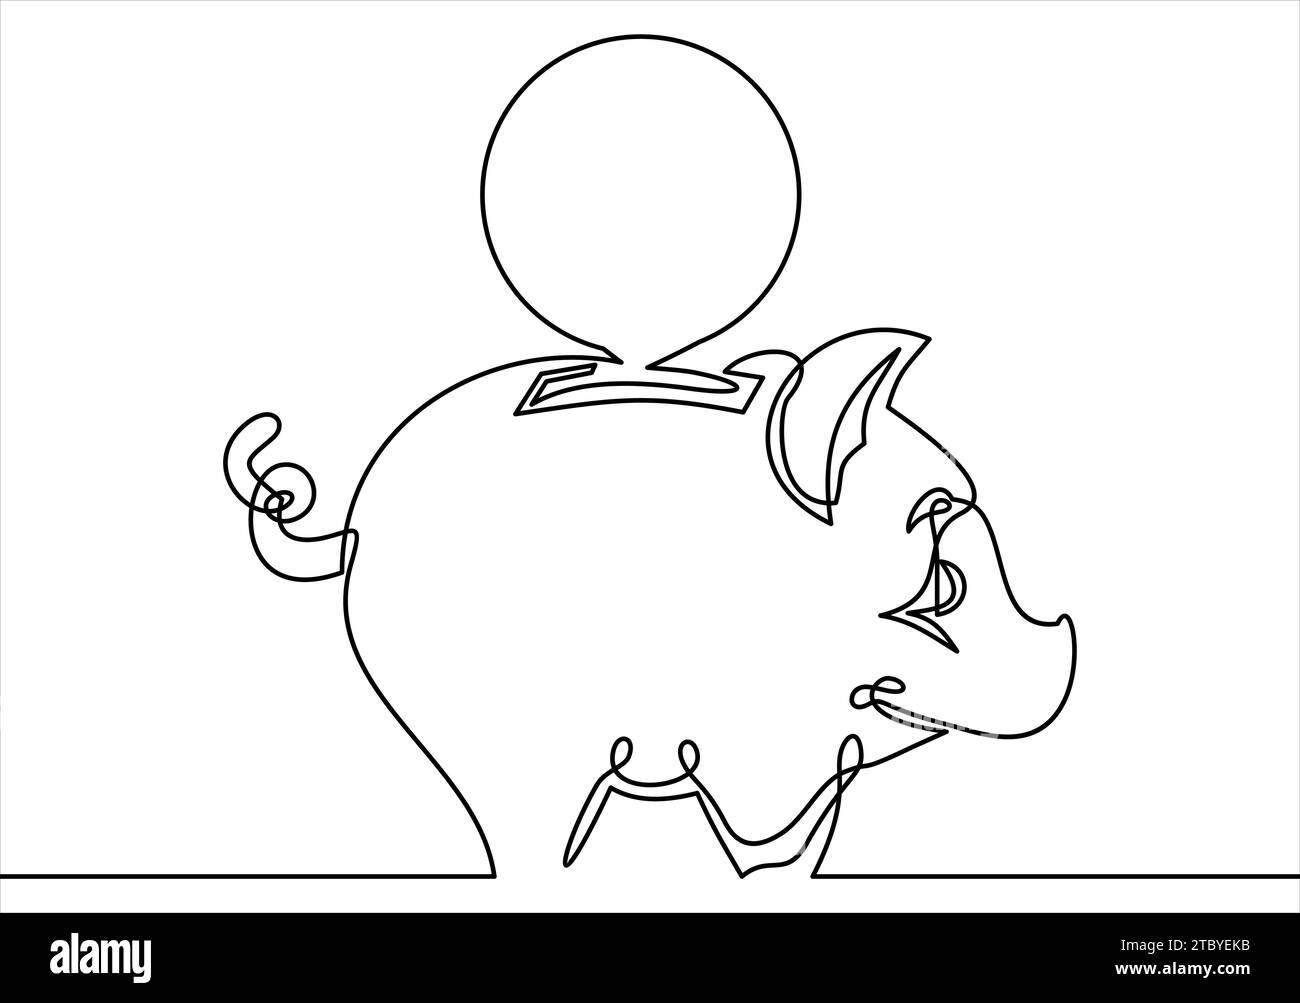 Continuous line drawing. Piggy bank. Stock Vector